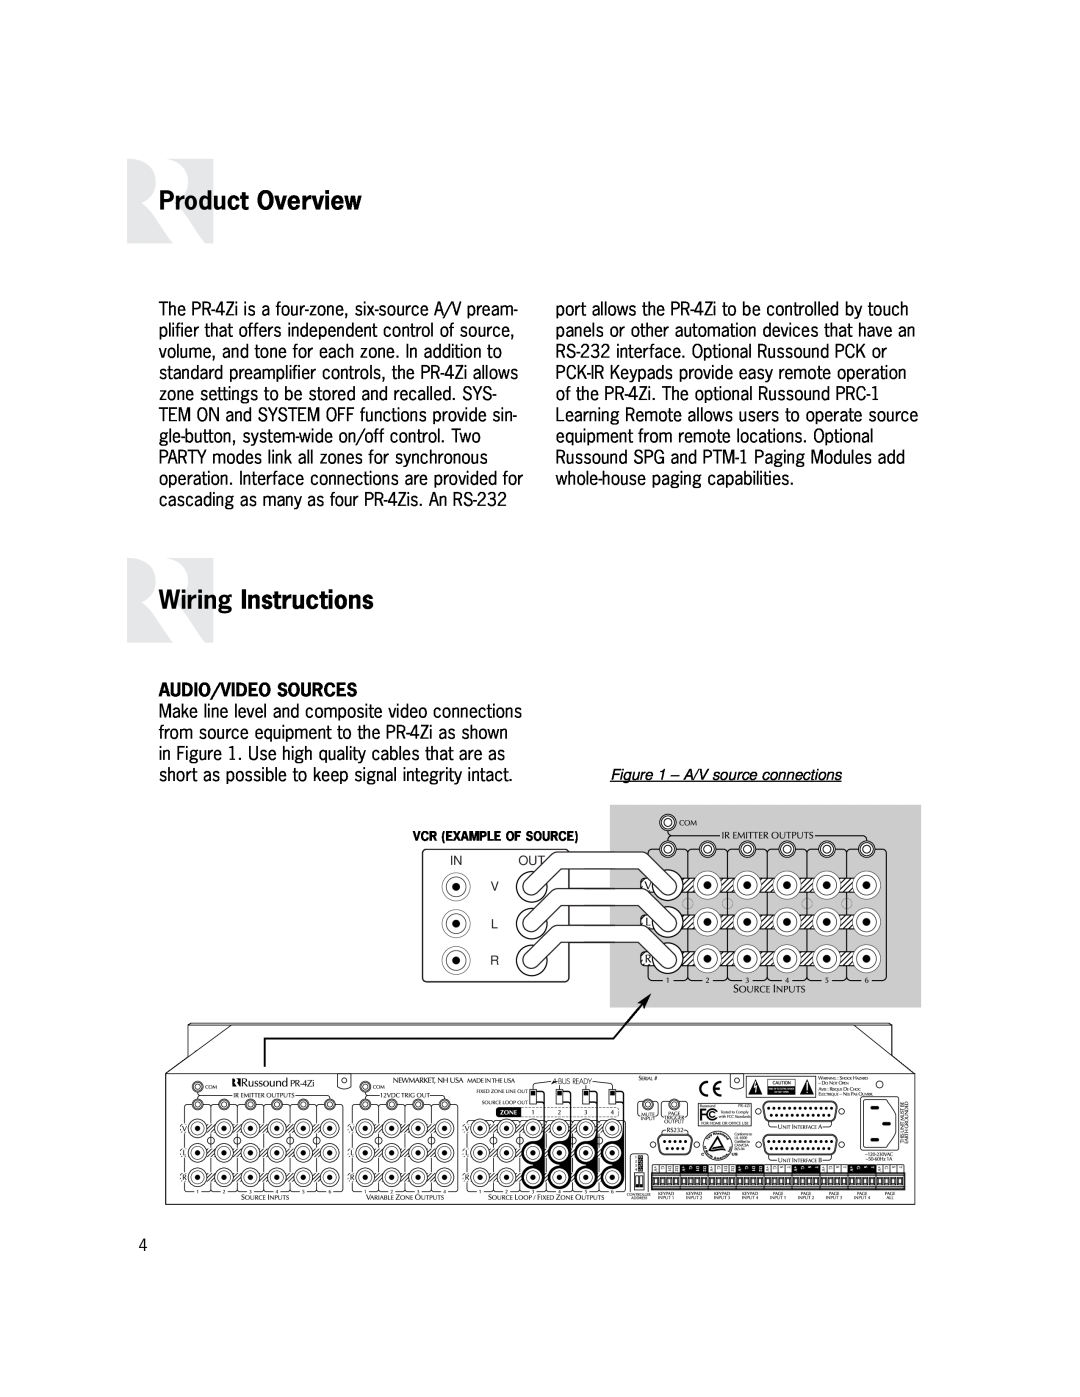 Russound PR-4Zi instruction manual Product Overview, Wiring Instructions, Audio/Video Sources 